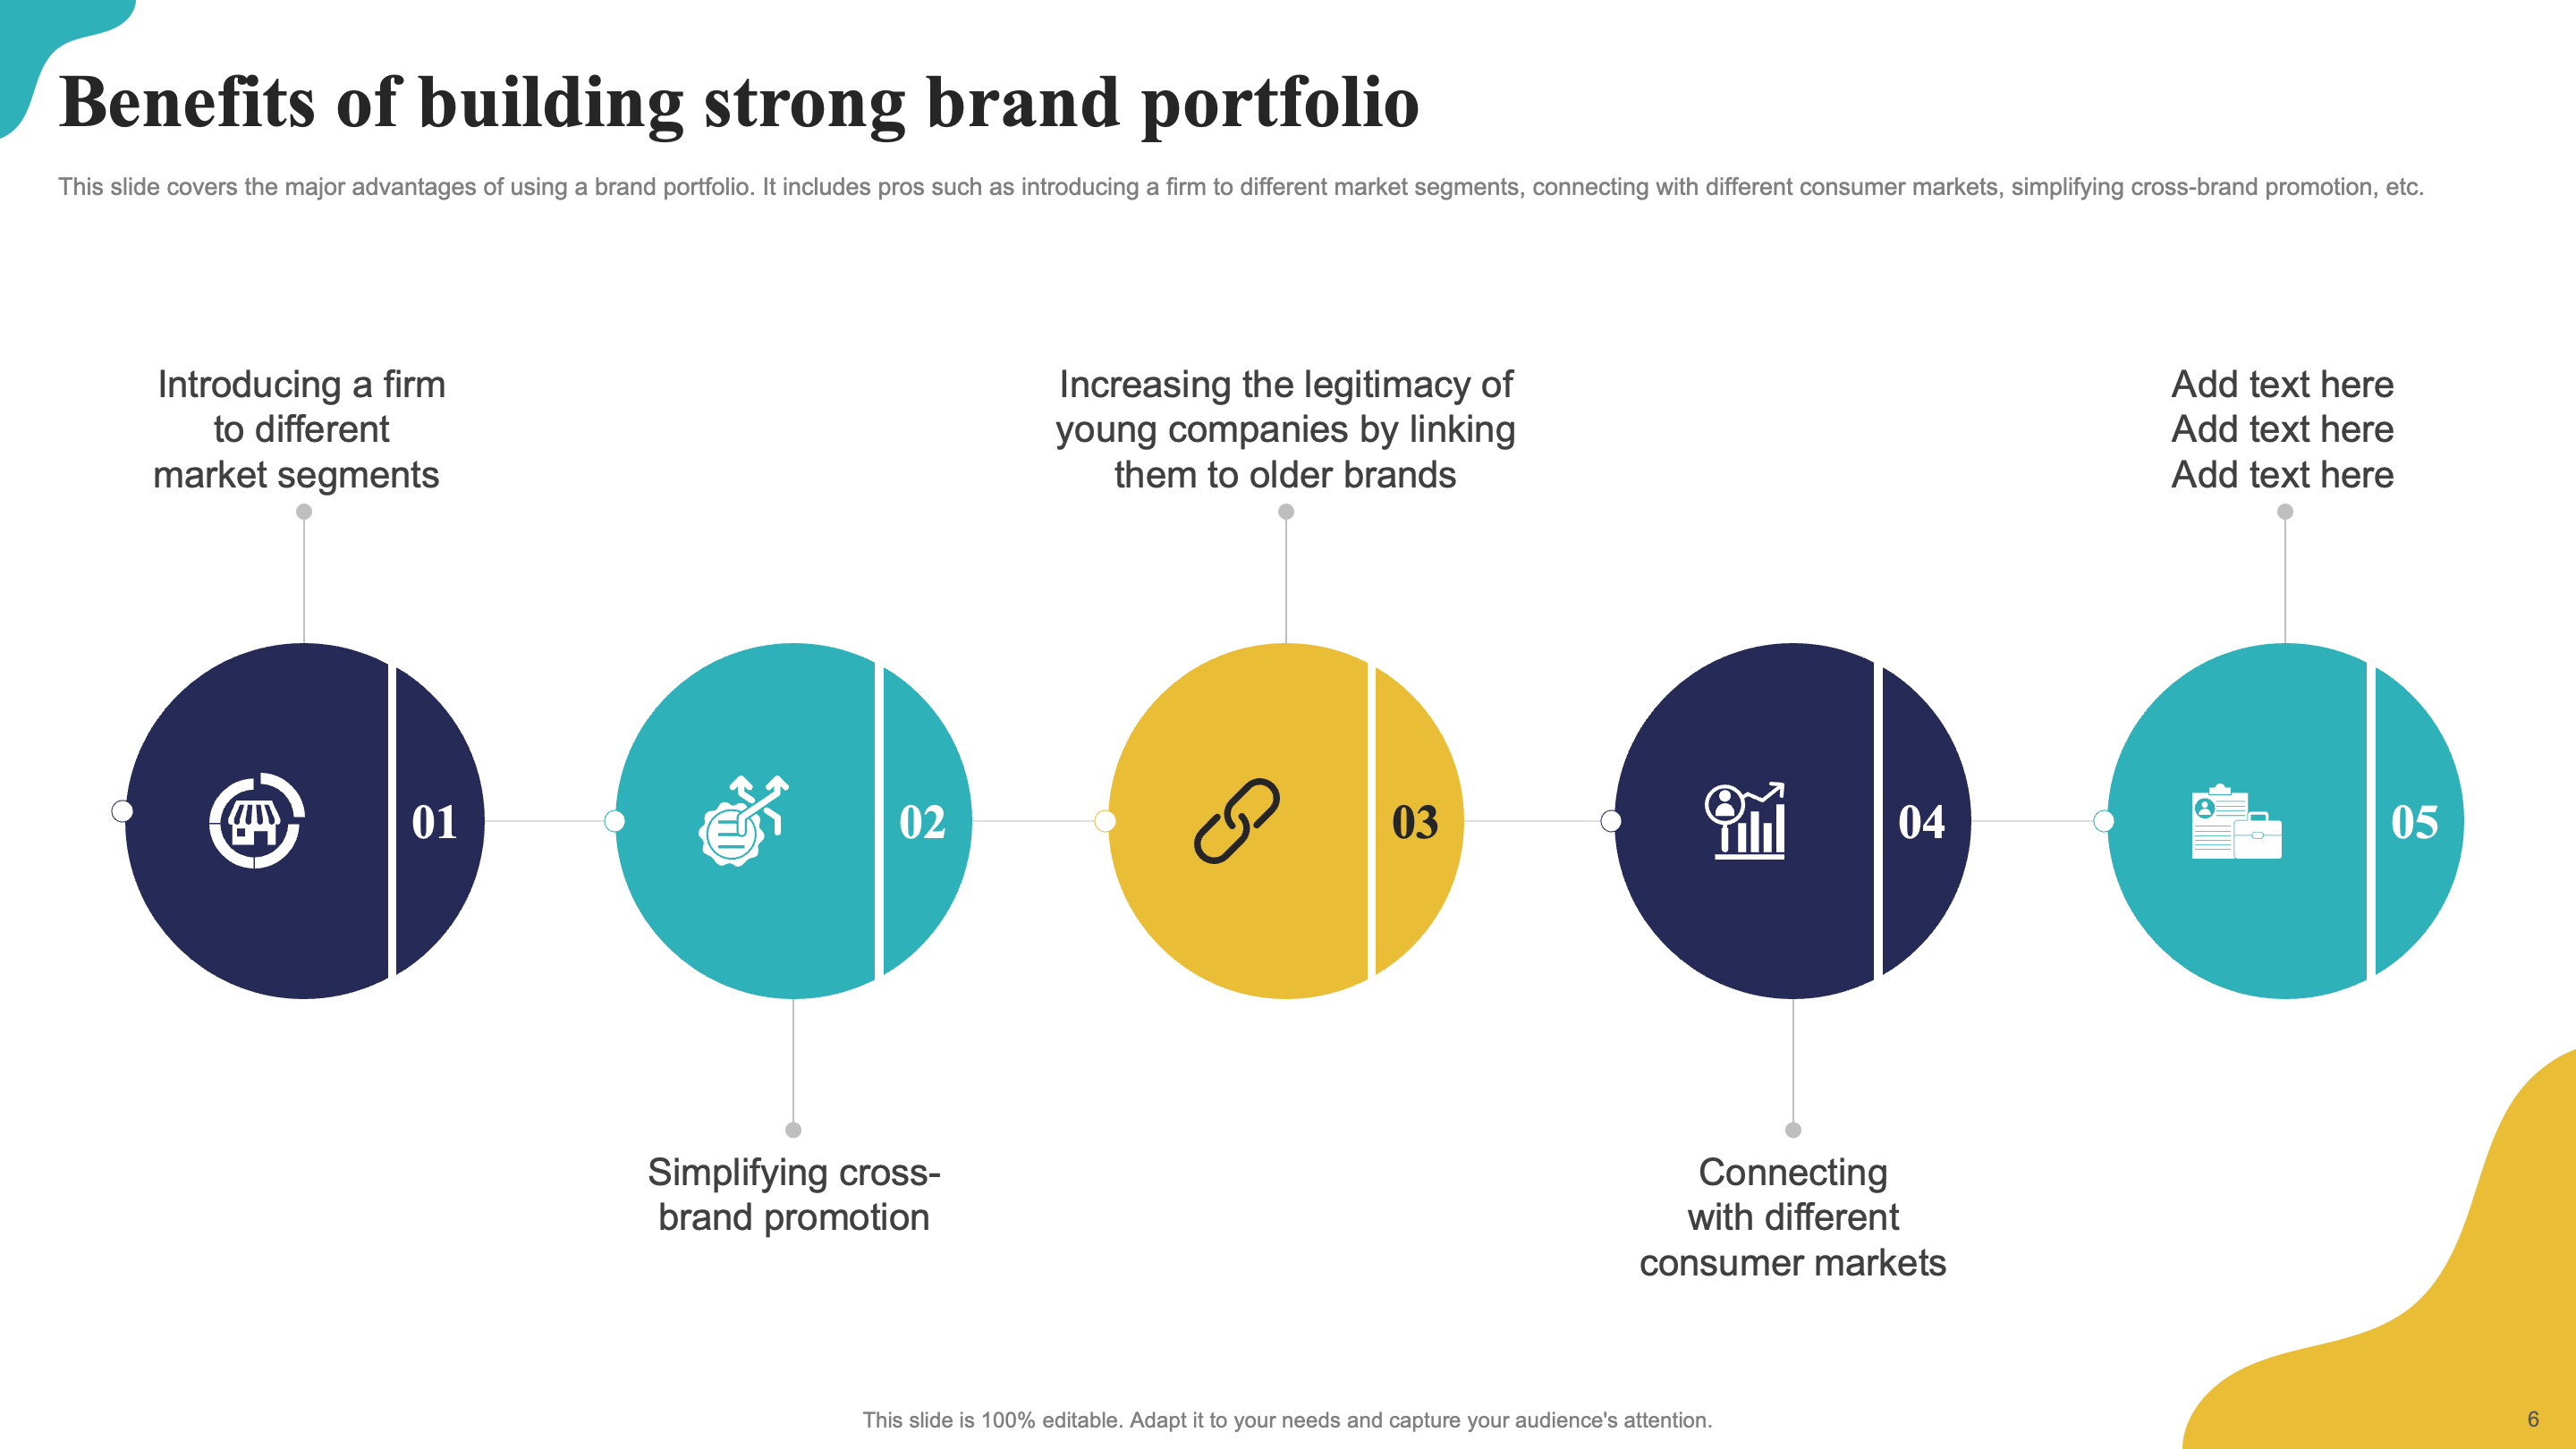 Benefits of Building a Strong Brand Portfolio Strategy 